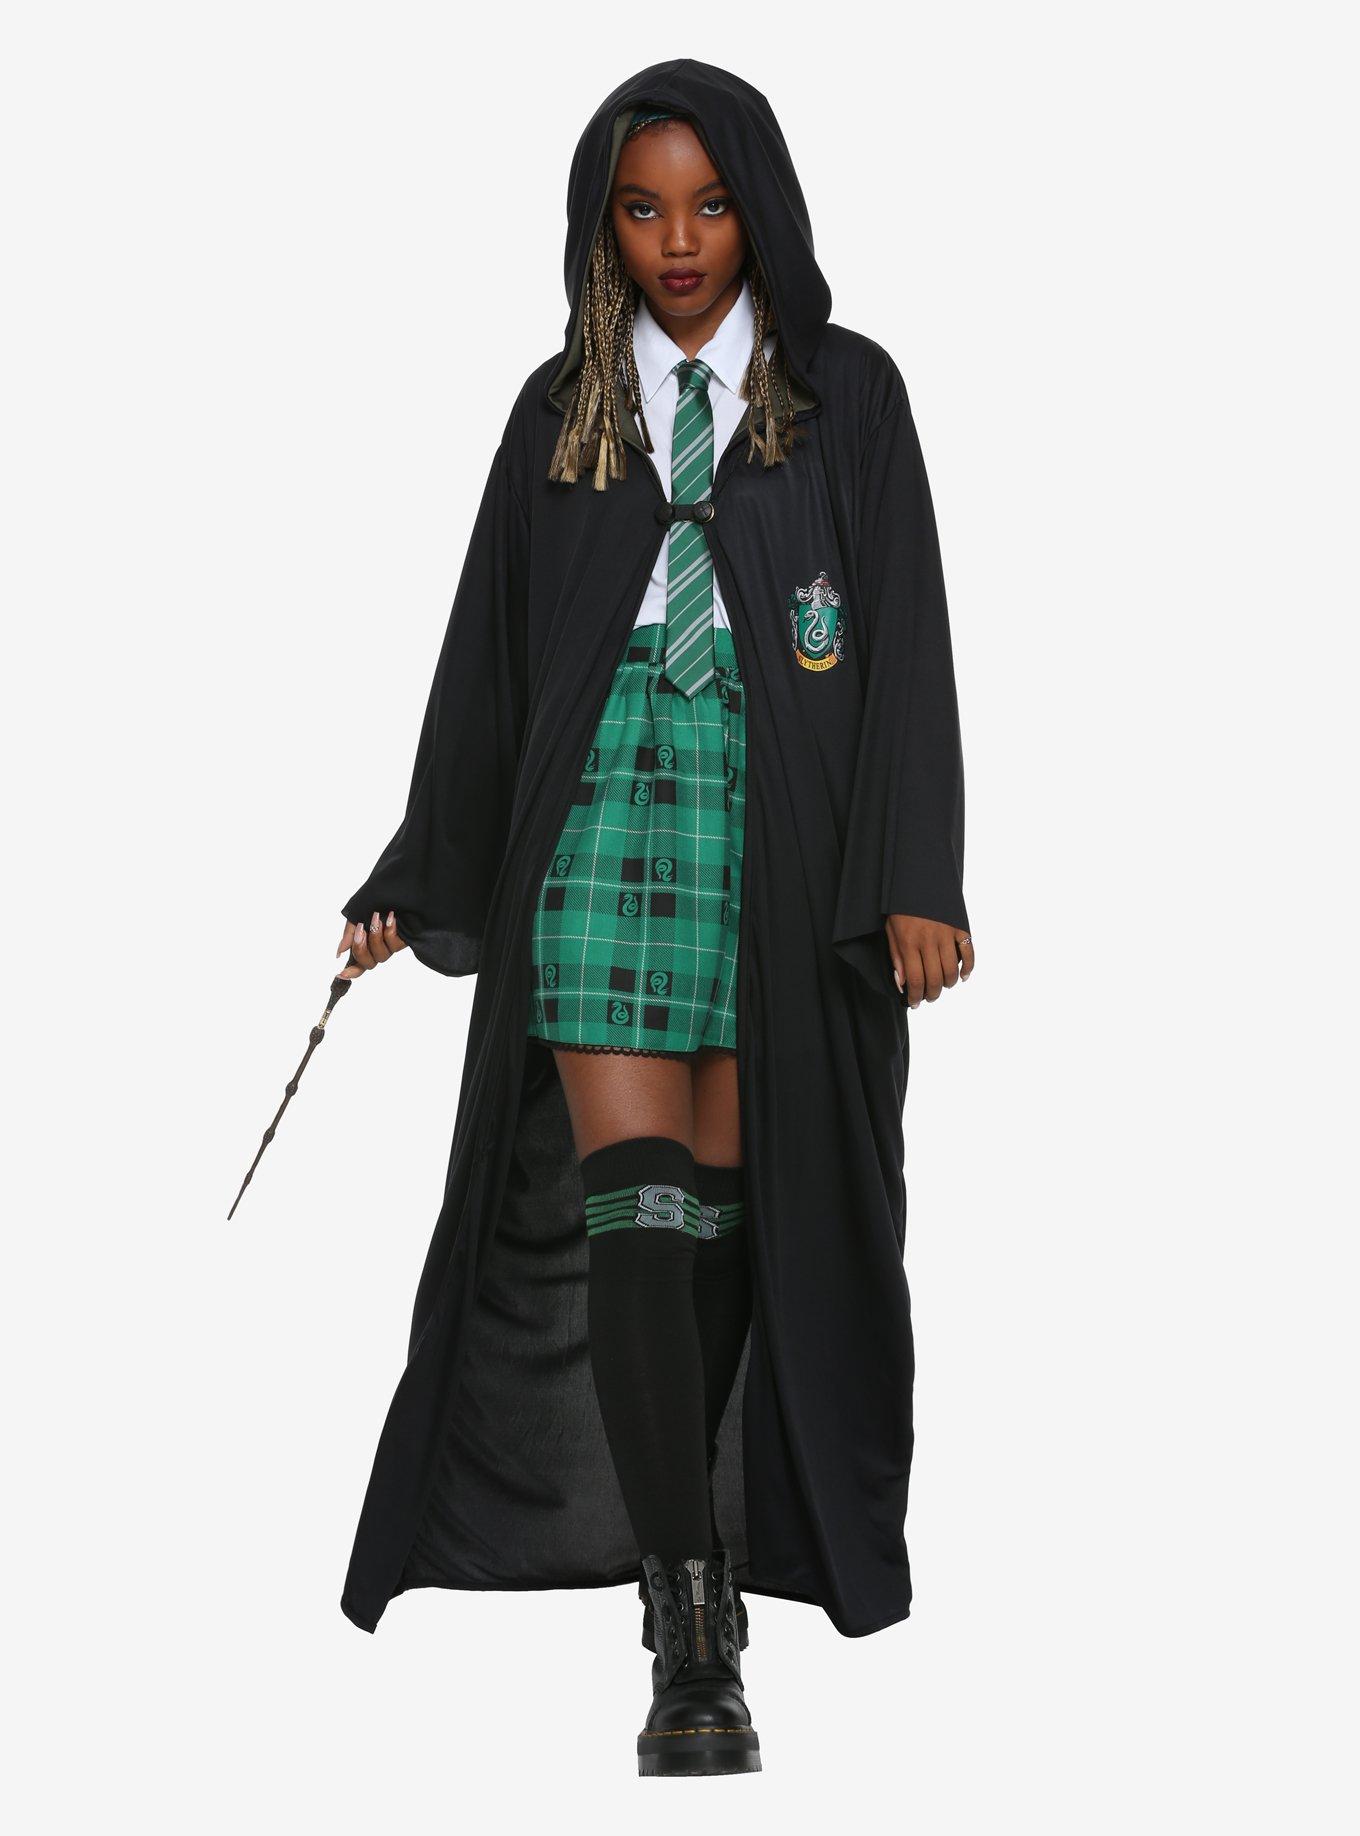 Harry Potter Slytherin House Robe Costume | Hot Topic